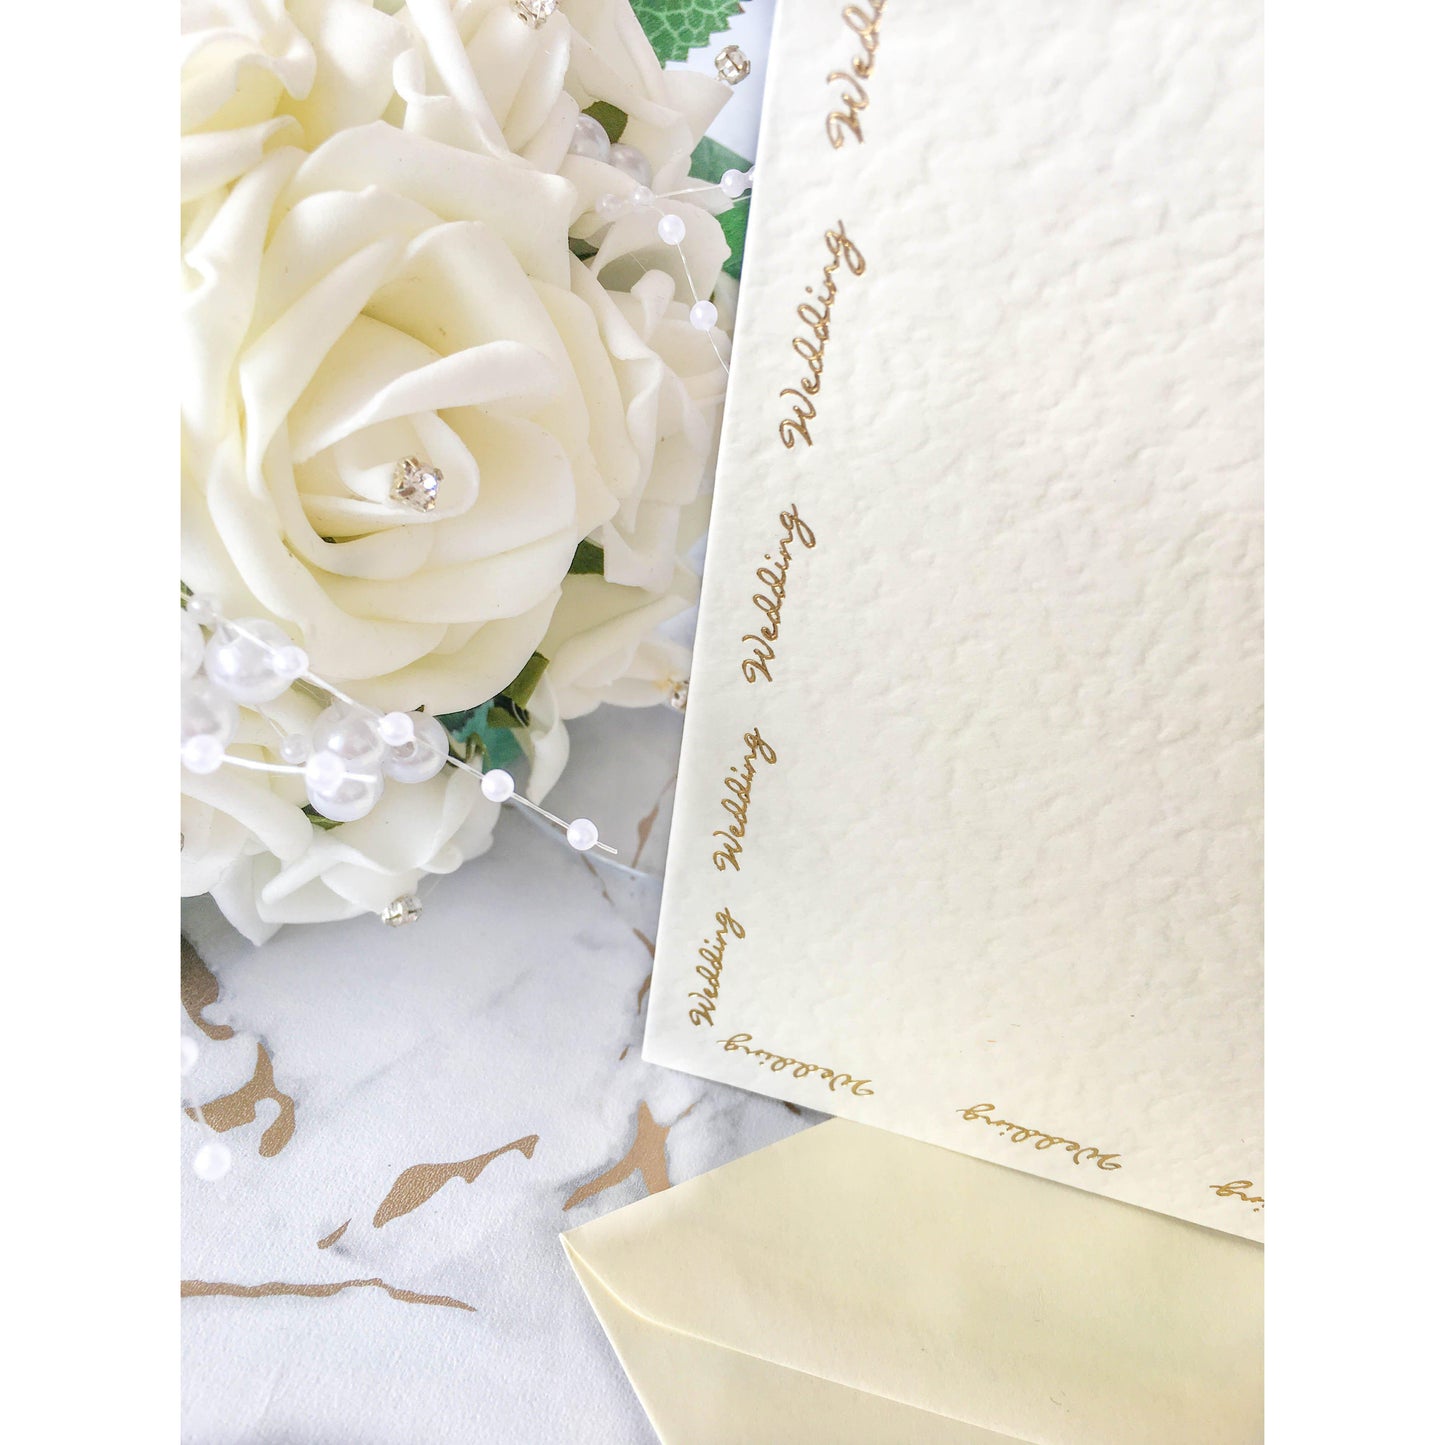 A6 Card Blanks Ivory Hammer Effect With Gold Foil Wedding Script 10pk With Envelopes - Clearance-The Creative Bride